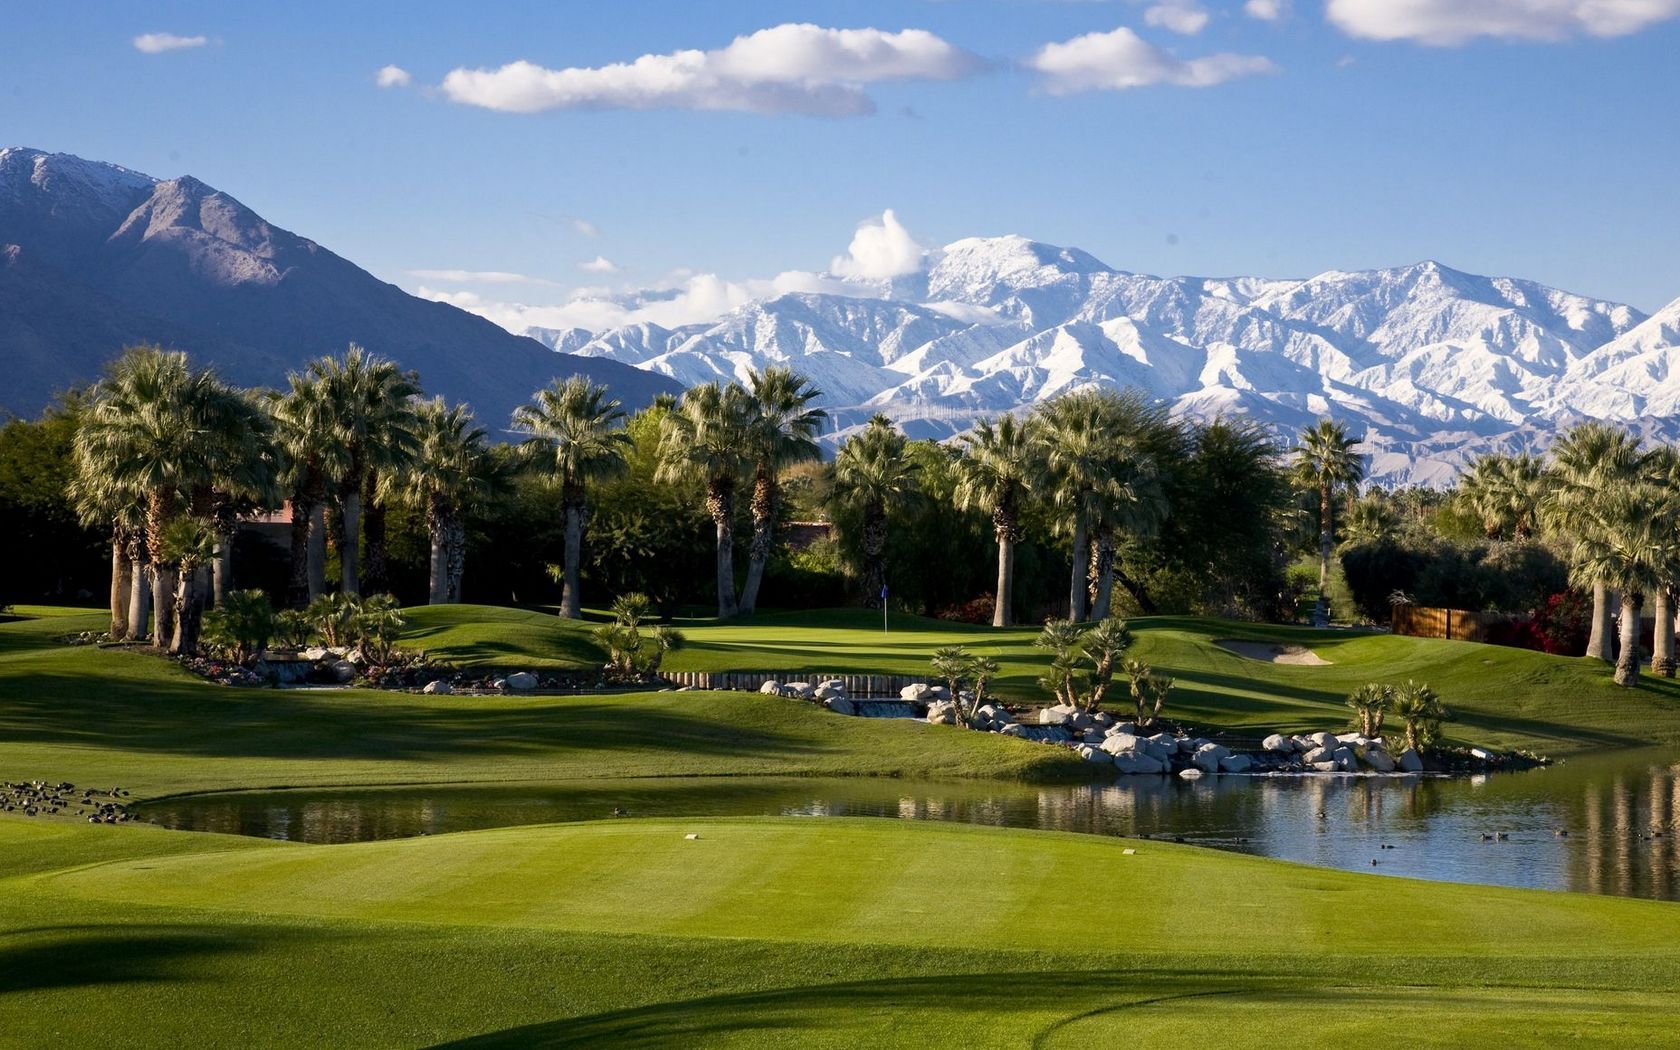 Golf Courses in in Palm Springs wallpaper - Lakes - Nature ...